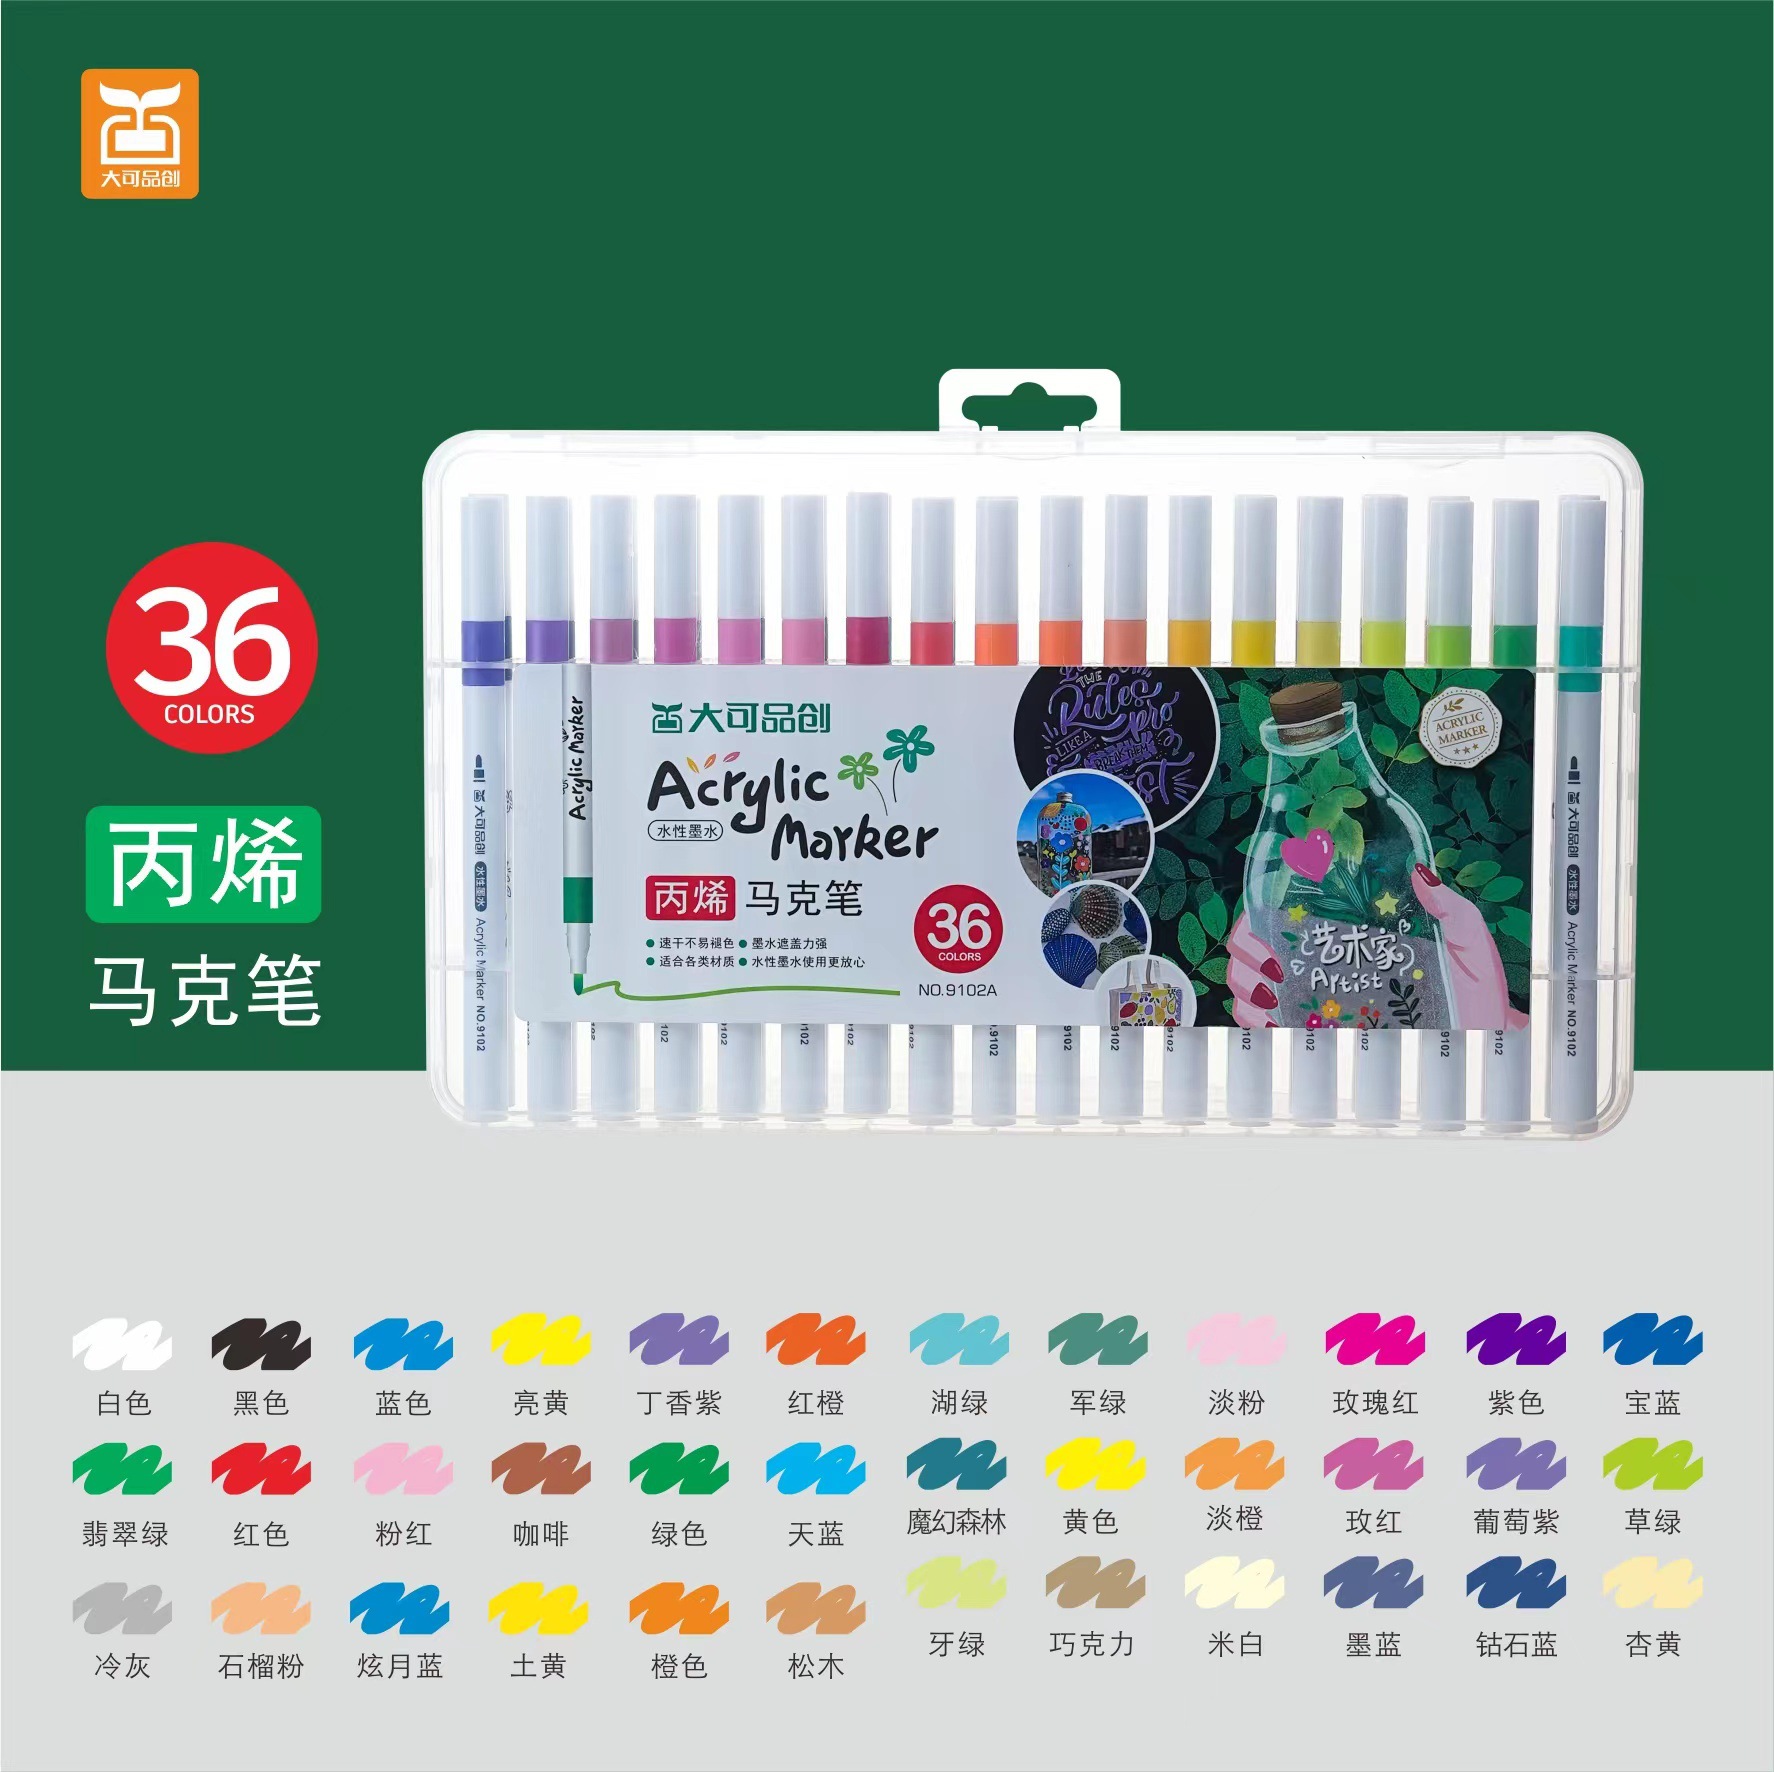 Acrylic Marker Pen Crayon/48/60 Children's DIY Painting Thin Rod Water-Based Mark Pen Opaque Paper Stackable